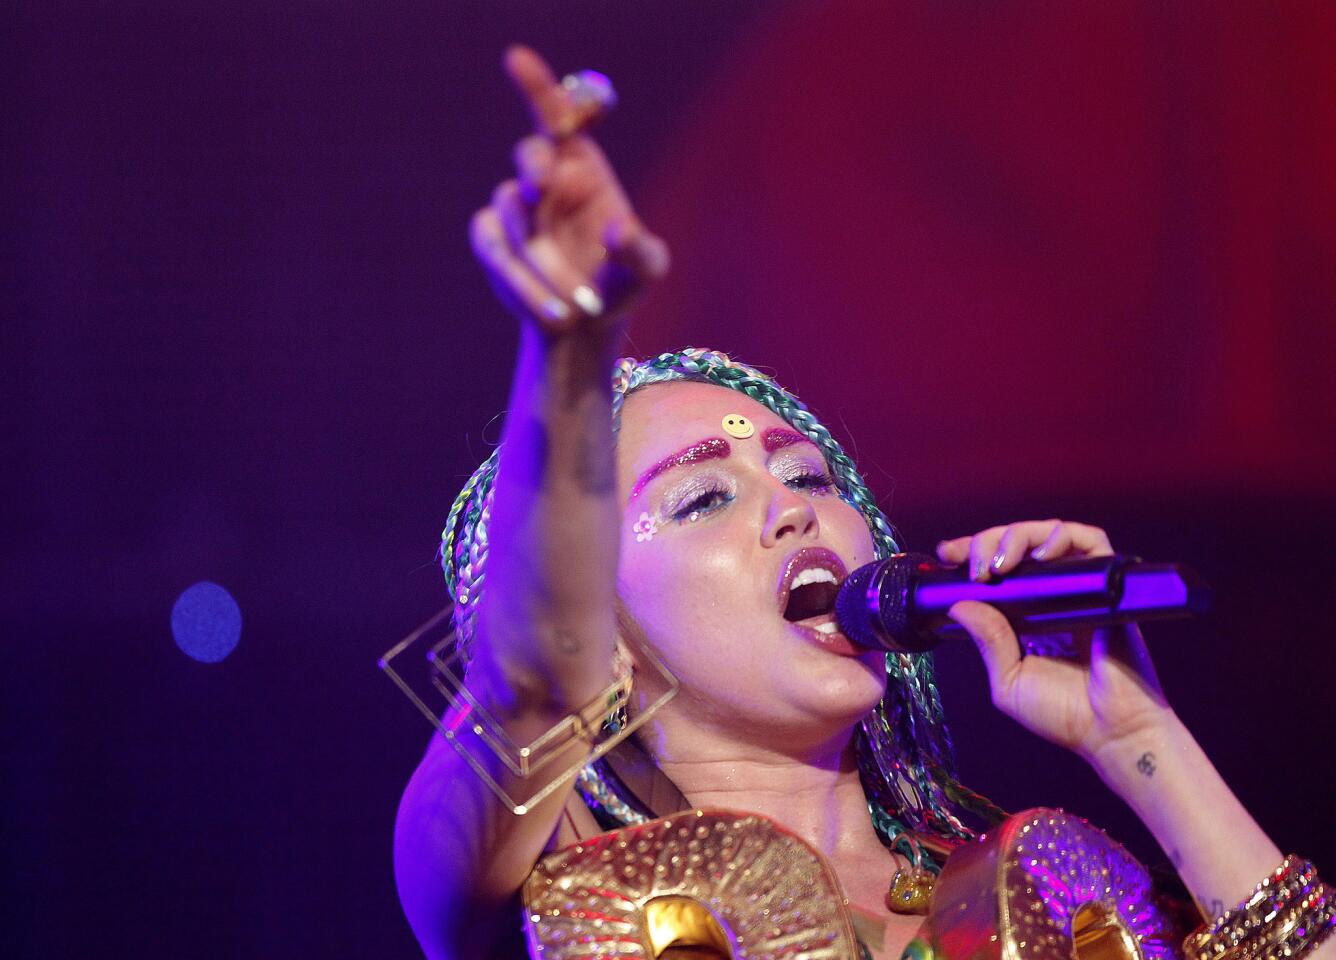 Miley Cyrus performs during her eye-popping, two-hour production at the Wiltern Theatre in Los Angeles